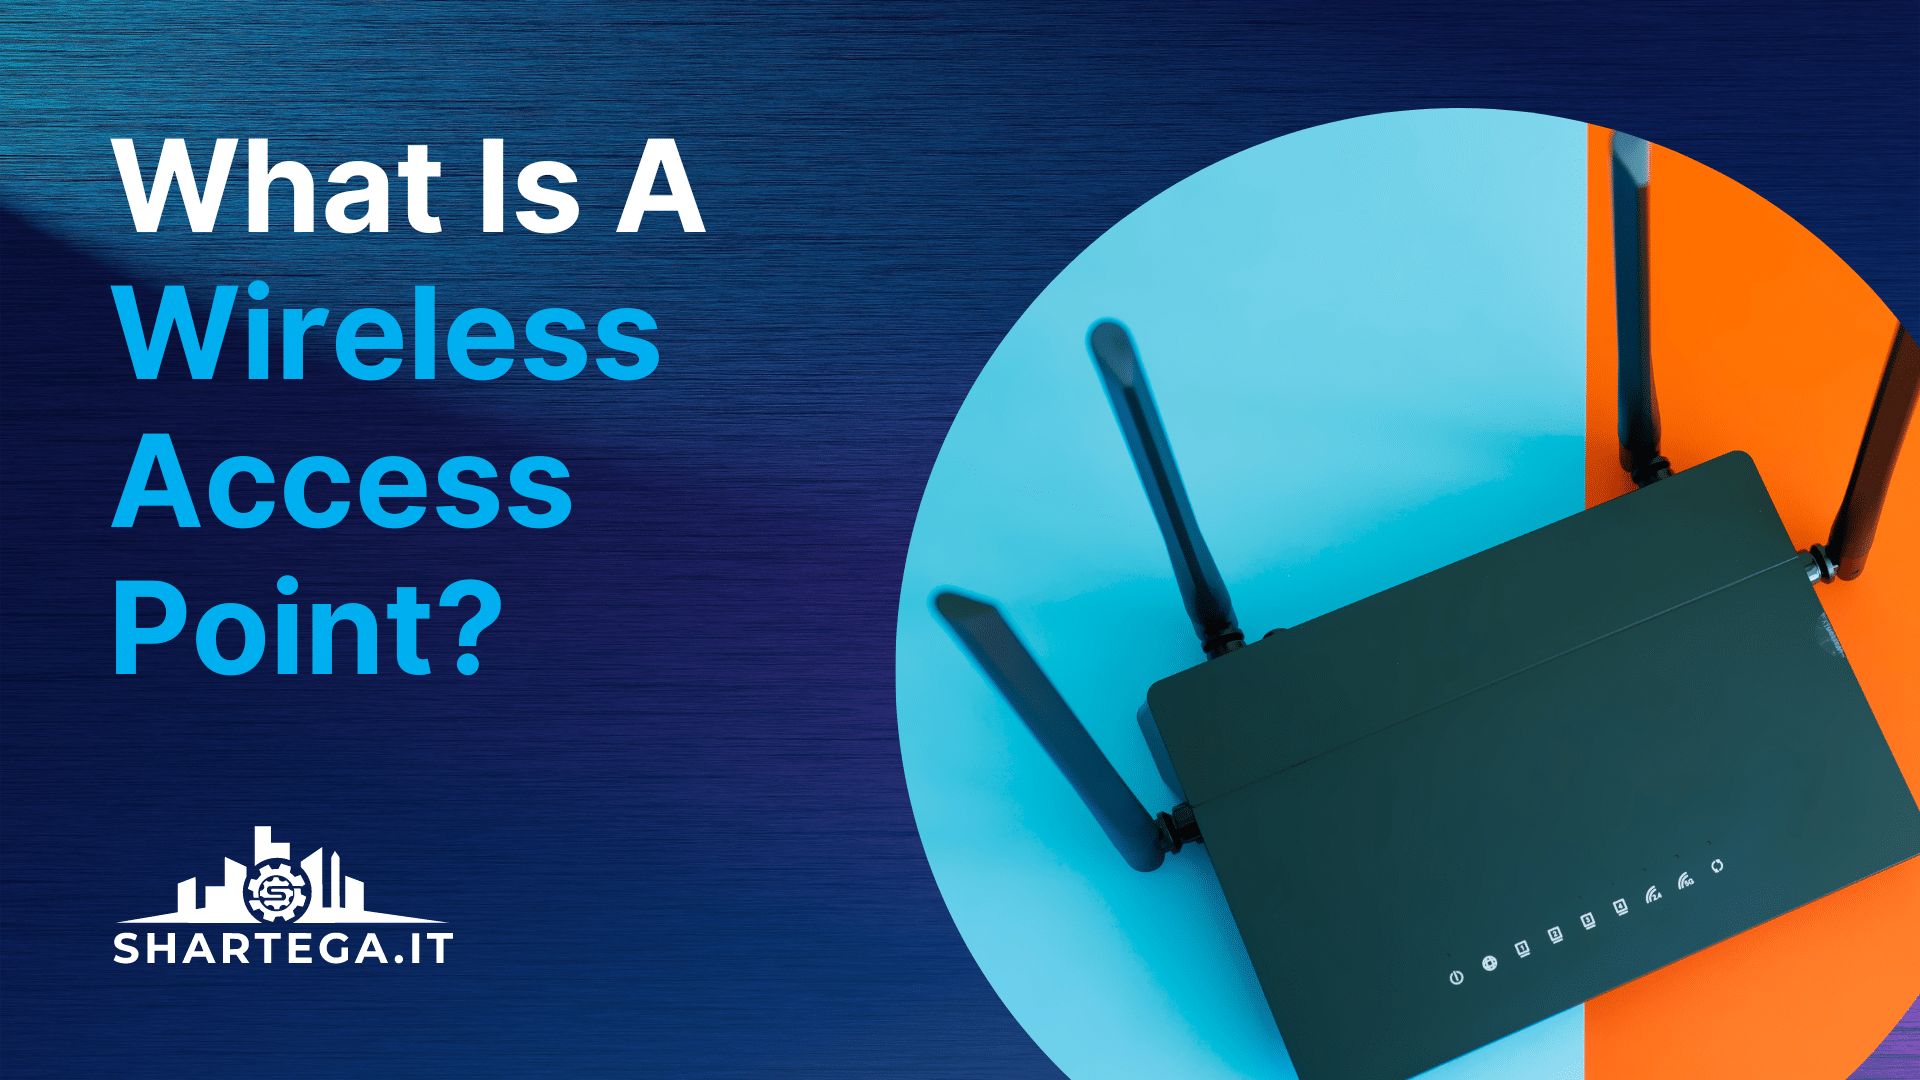 What Is A Wireless Access Point